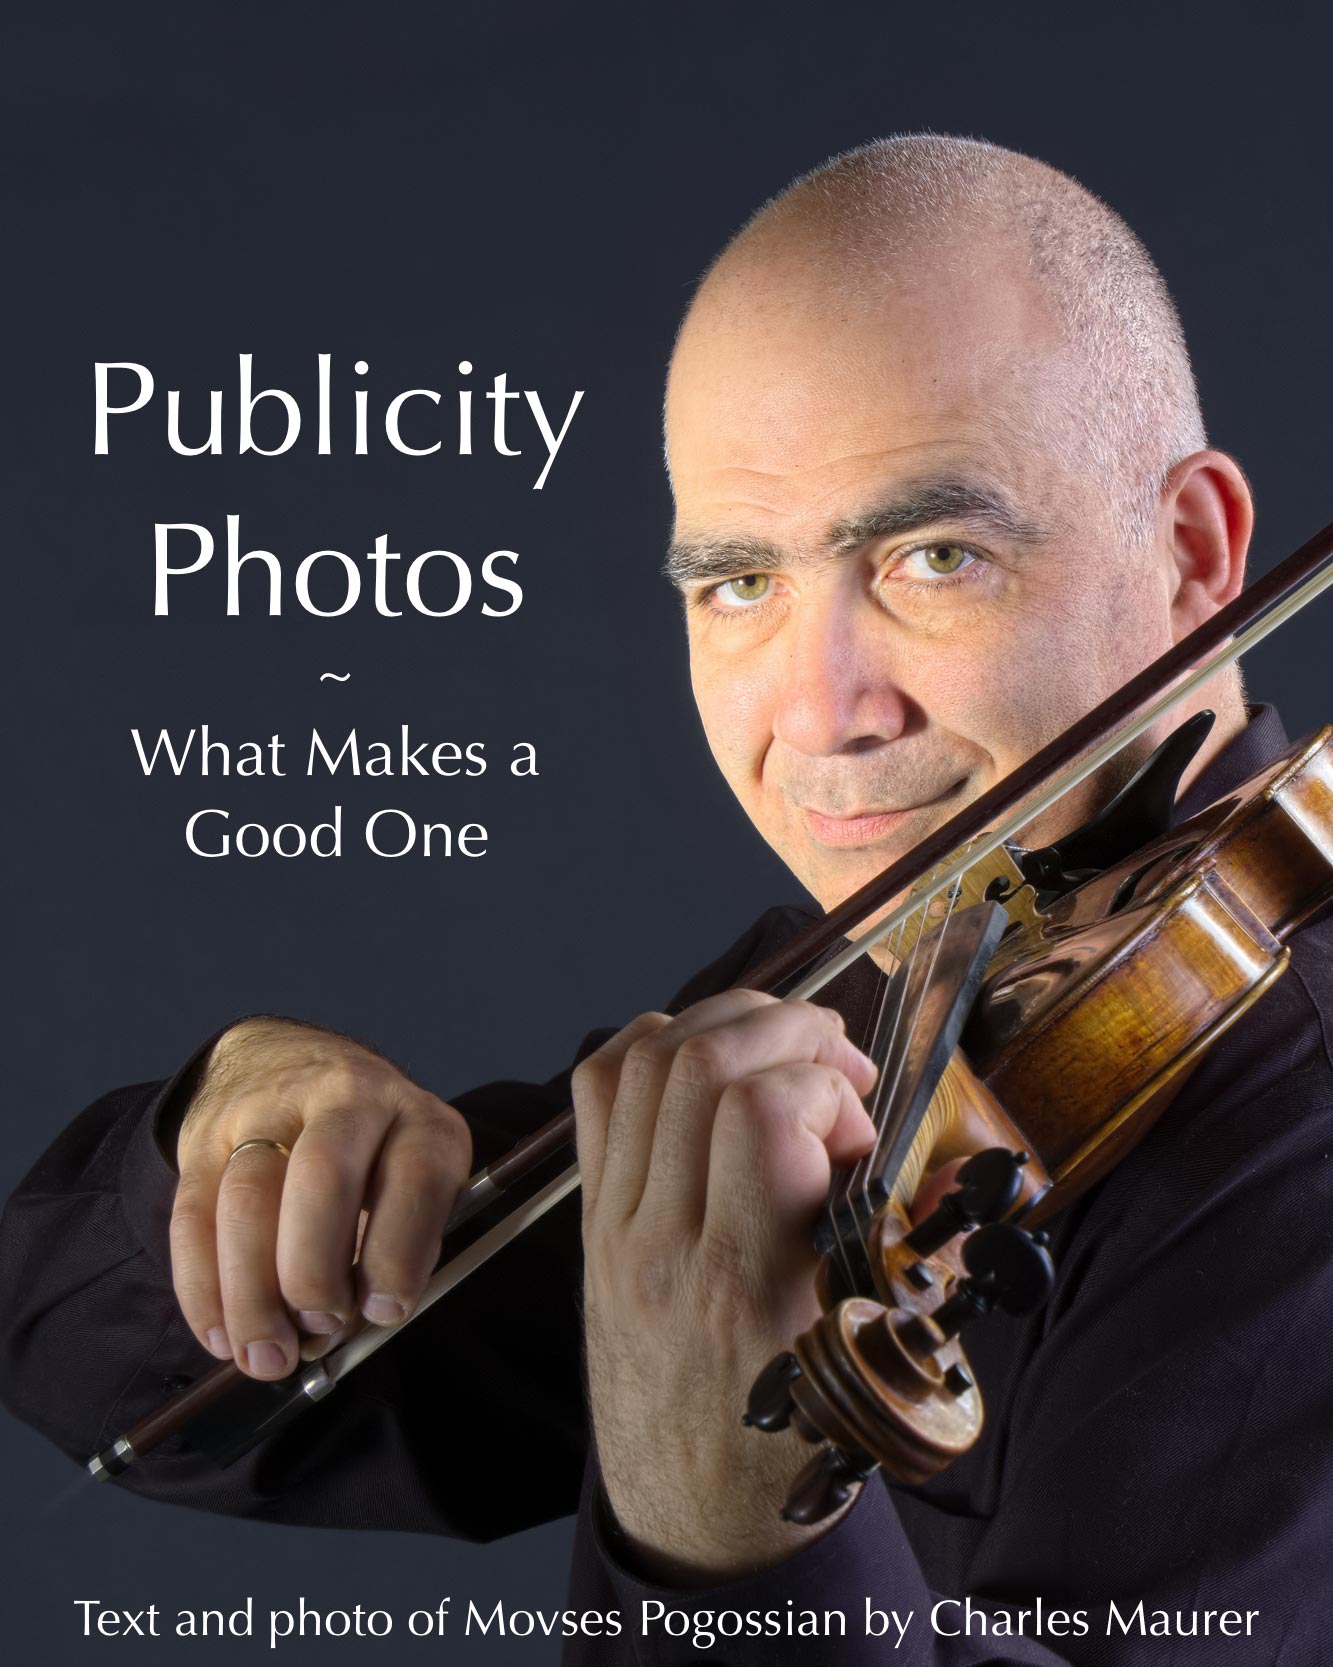 Publicity Photos - What Makes a Good One